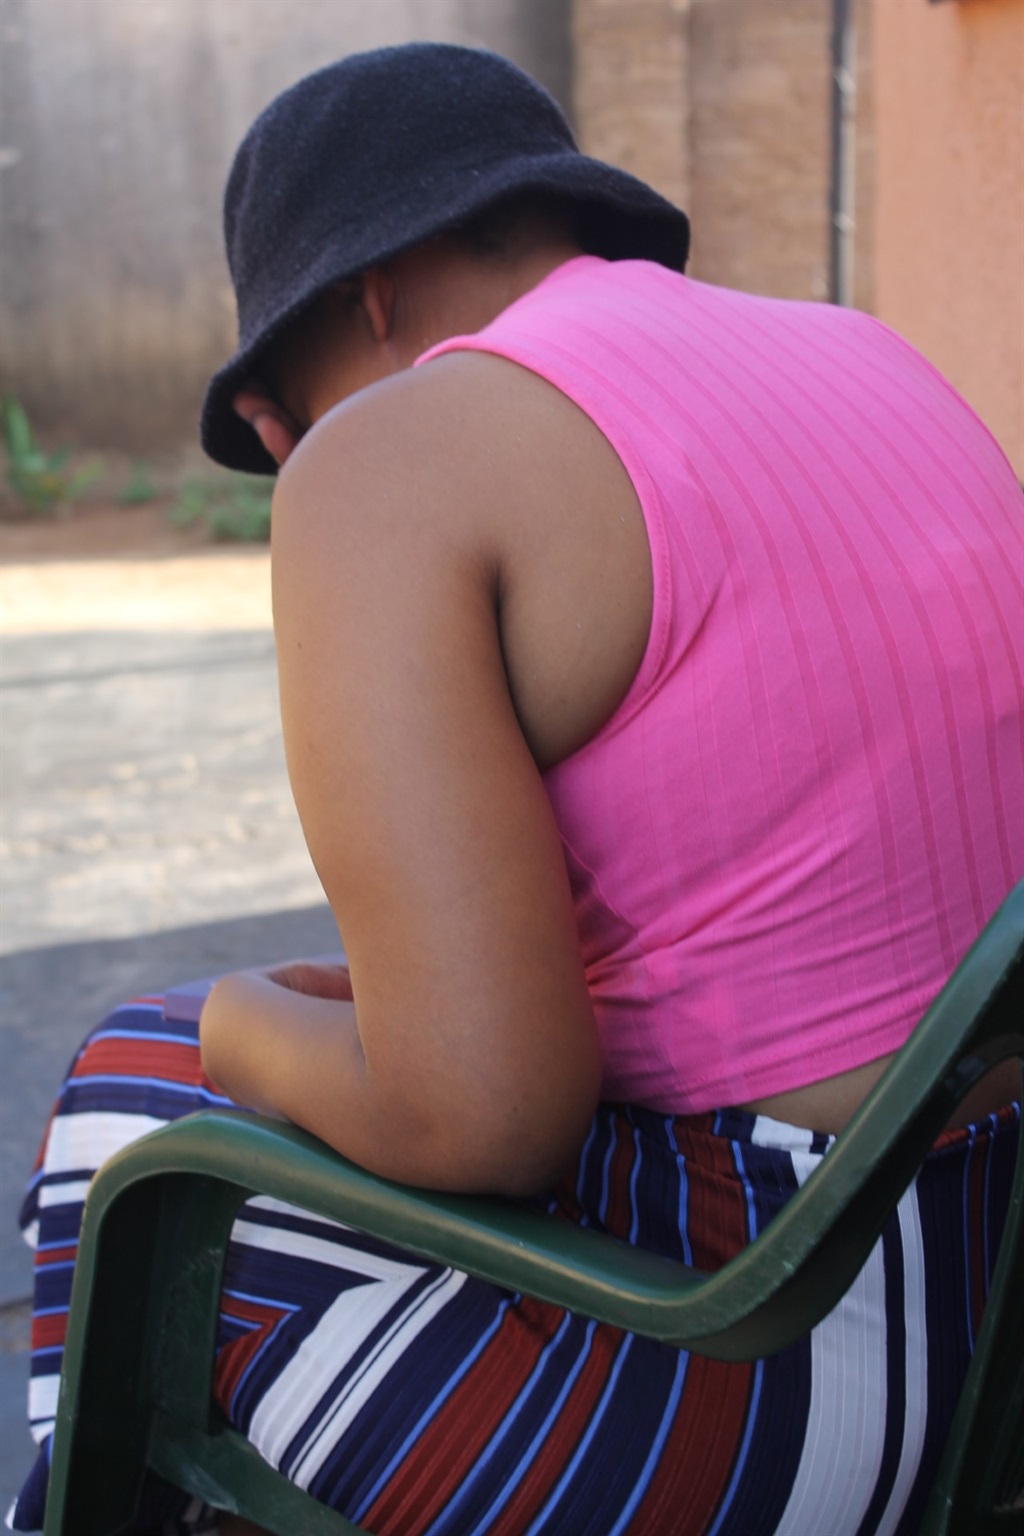 The sad mum from Mabopane said she wants justice for her son.  Photo by Thokozile Mnguni